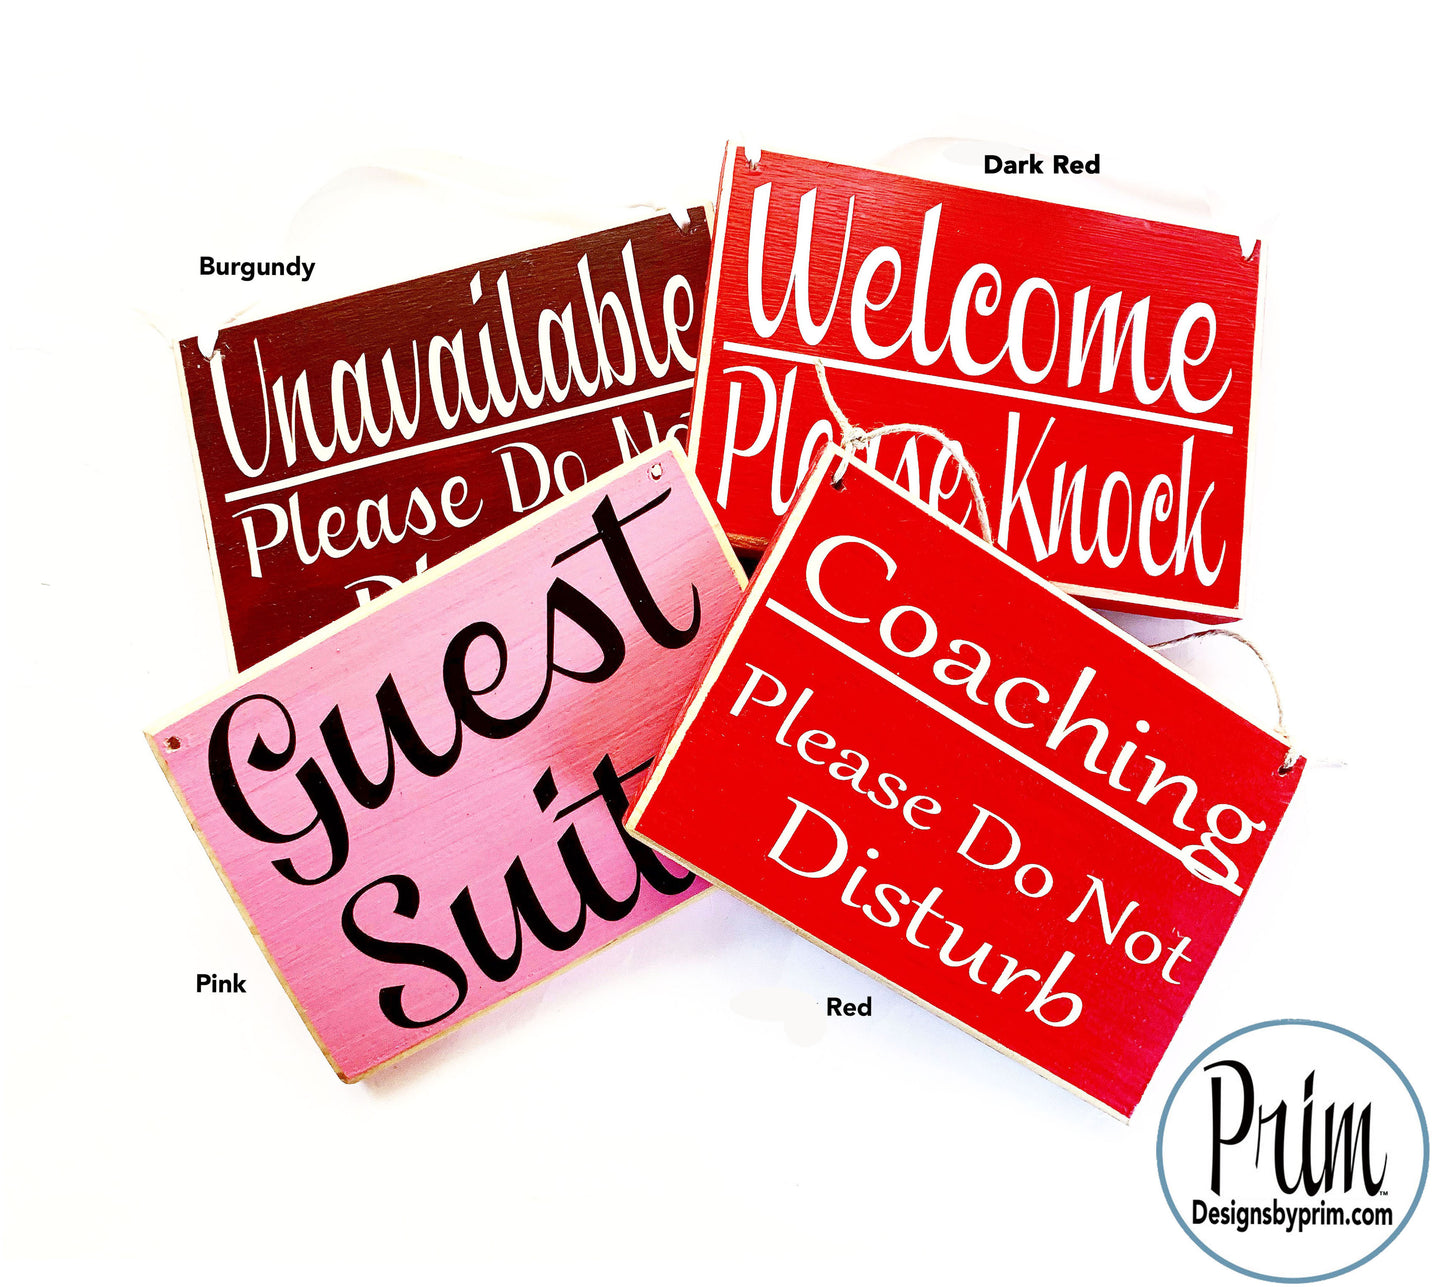 Designs by Prim Custom Wood Sign Color Chart Reds Pink Burgundy